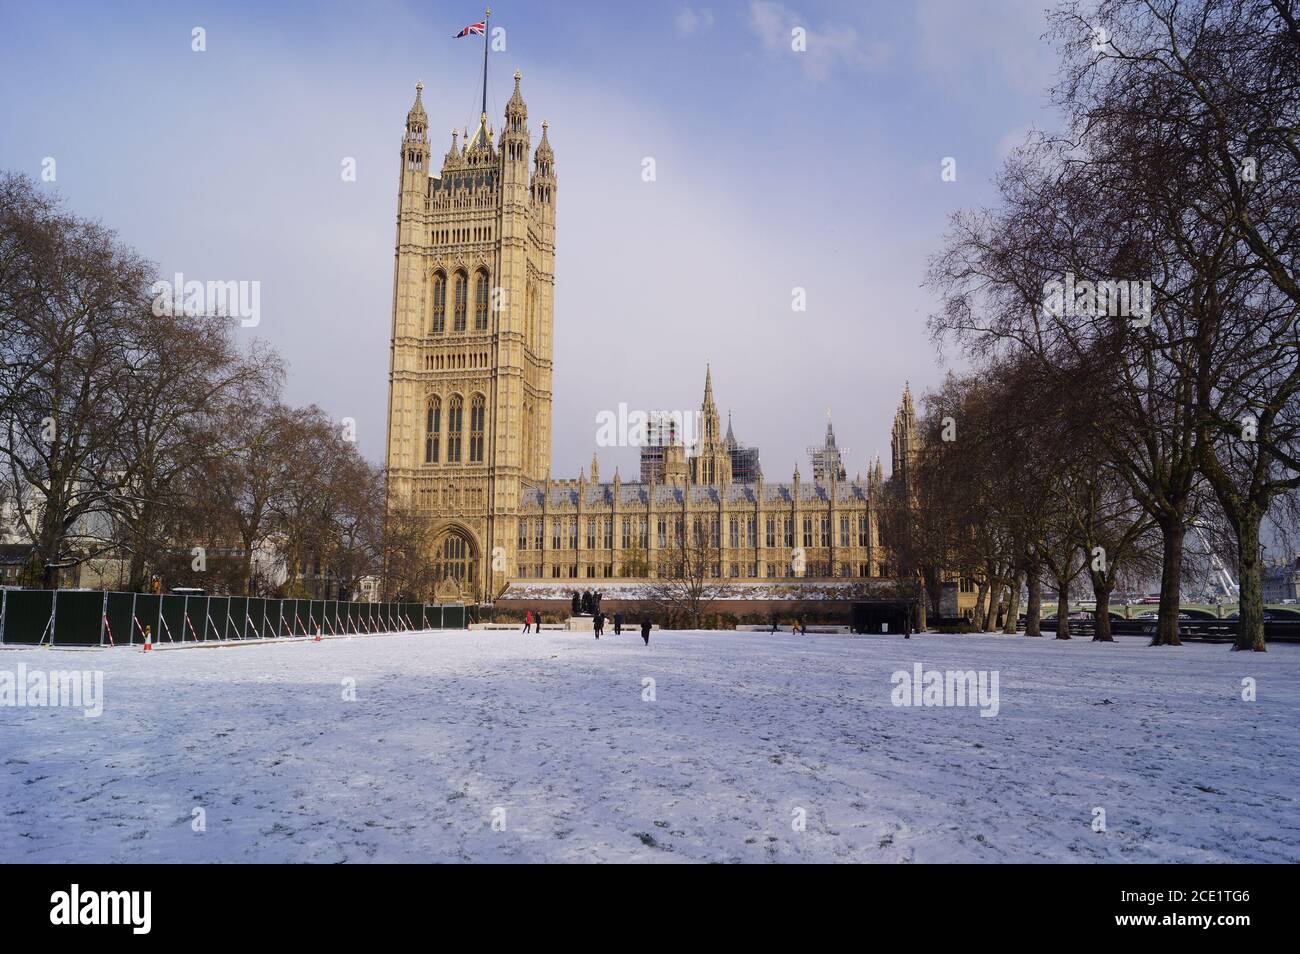 London, UK: a view of Victoria Tower Garden and the Palace of Parliament after a snowfall Stock Photo